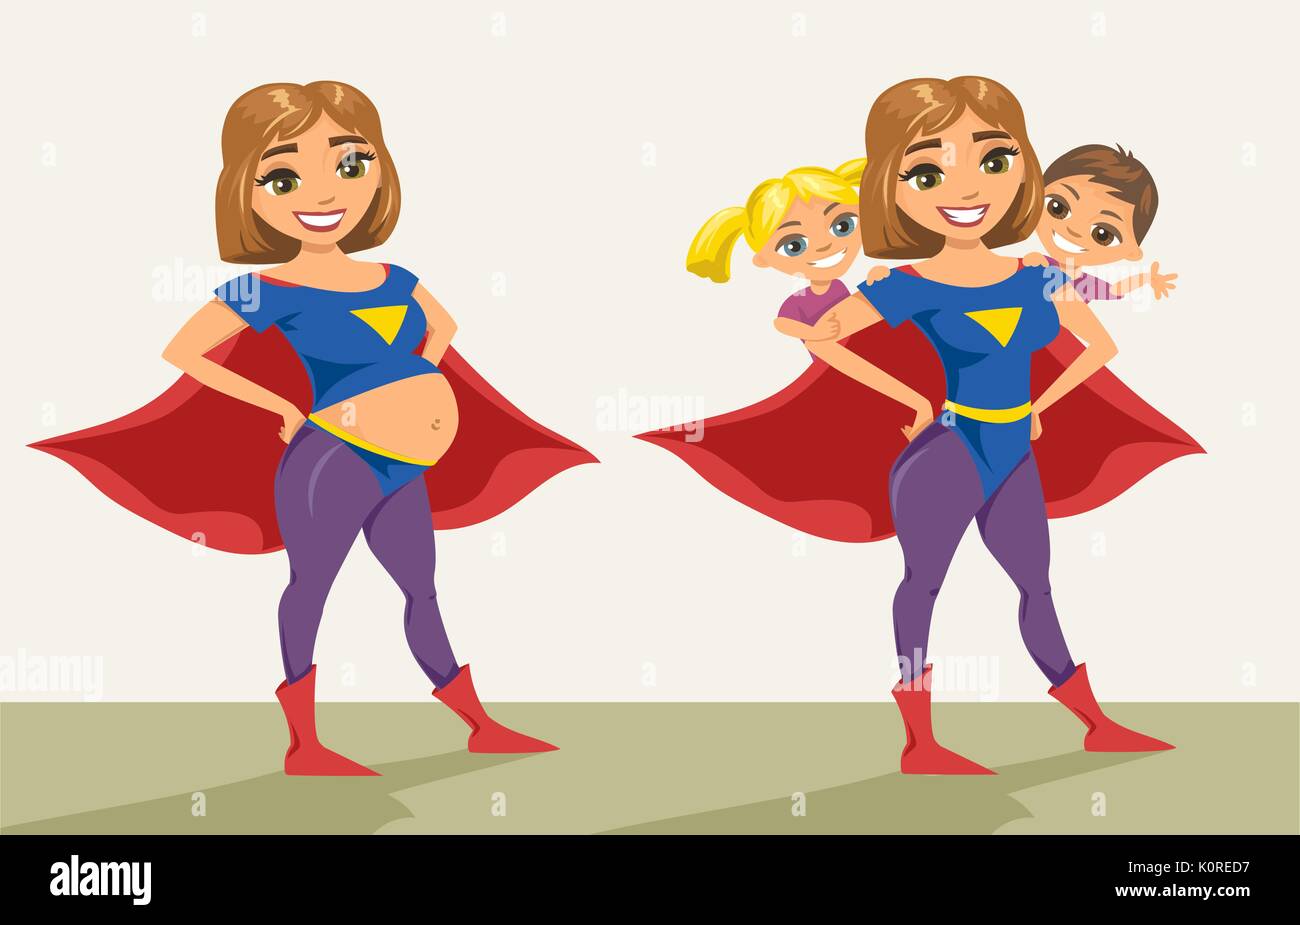 Super hero, super mom. Happy smiling super mother with her children. Vector illustration with isolated characters. Stock Vector